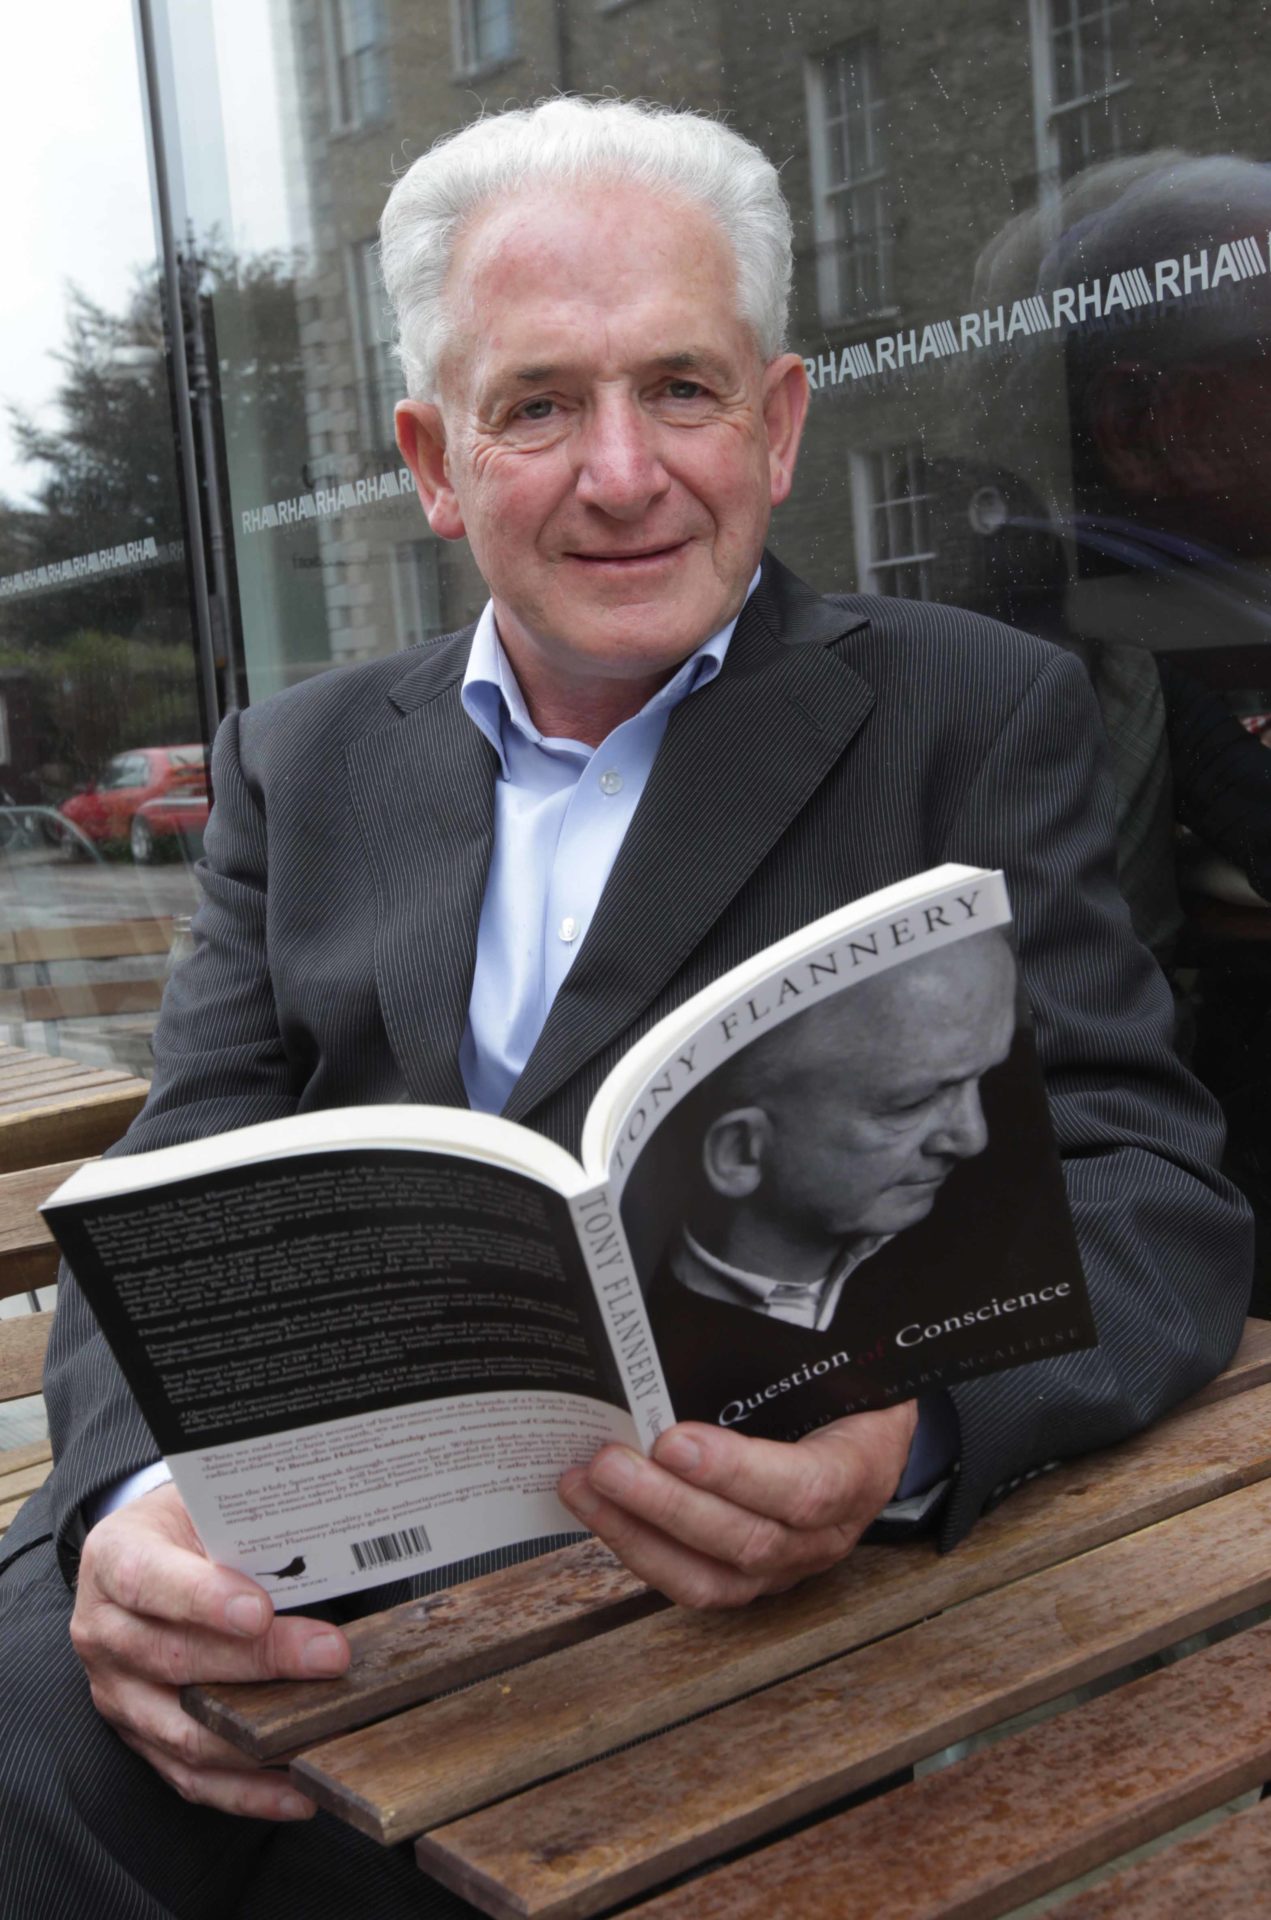 Silenced Priest Fr Tony Flannery launches his new book, ‘A Question of Conscience’